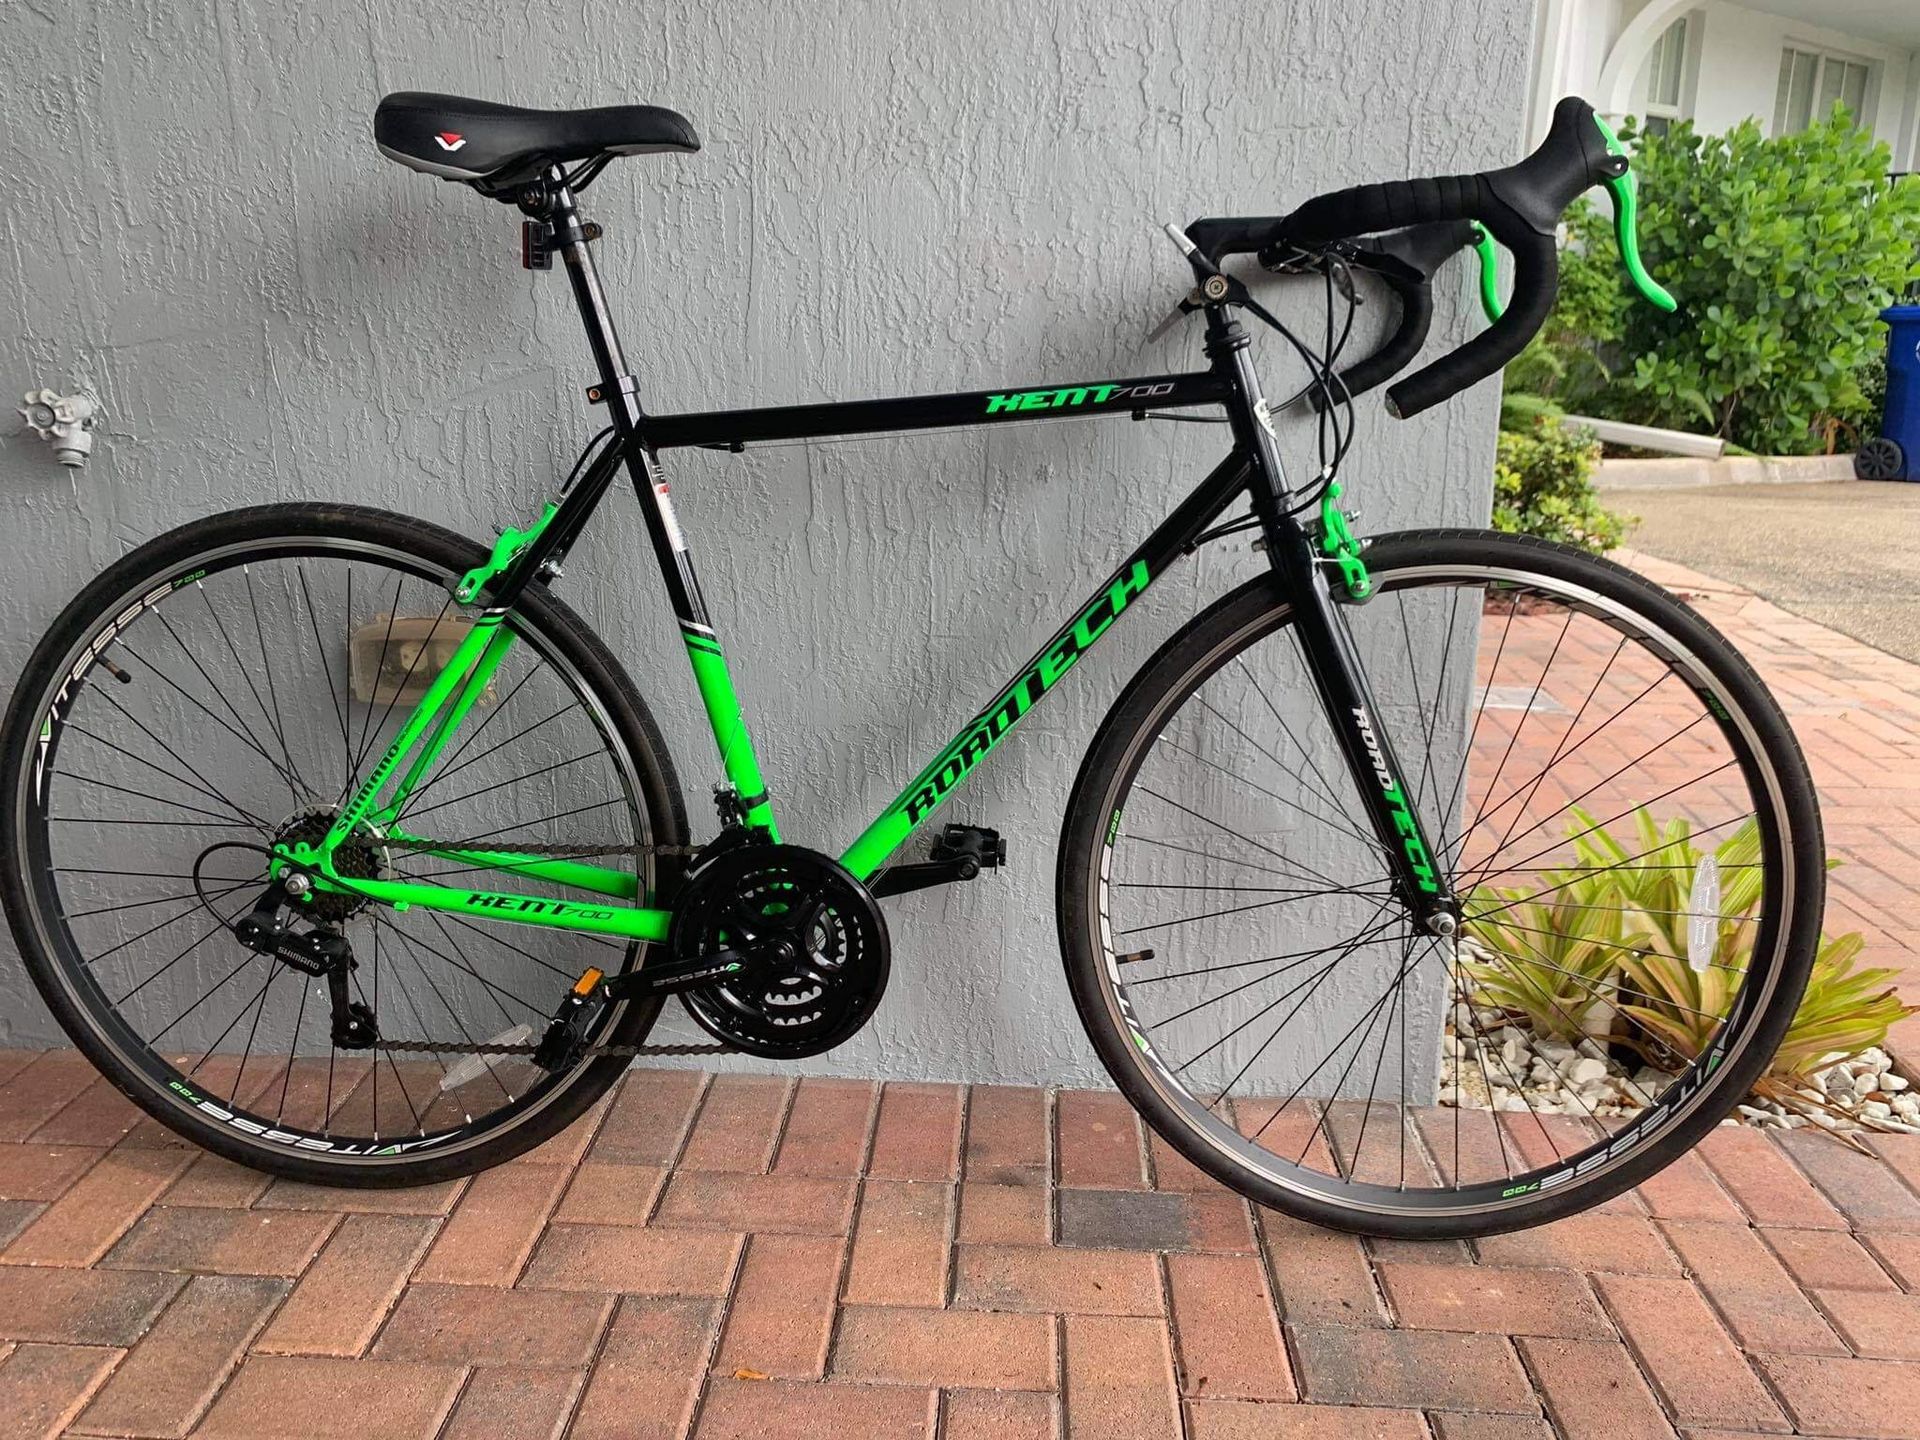 Road bike - bicycle - READ DESCRIPTION - Shimano components - willing to trade